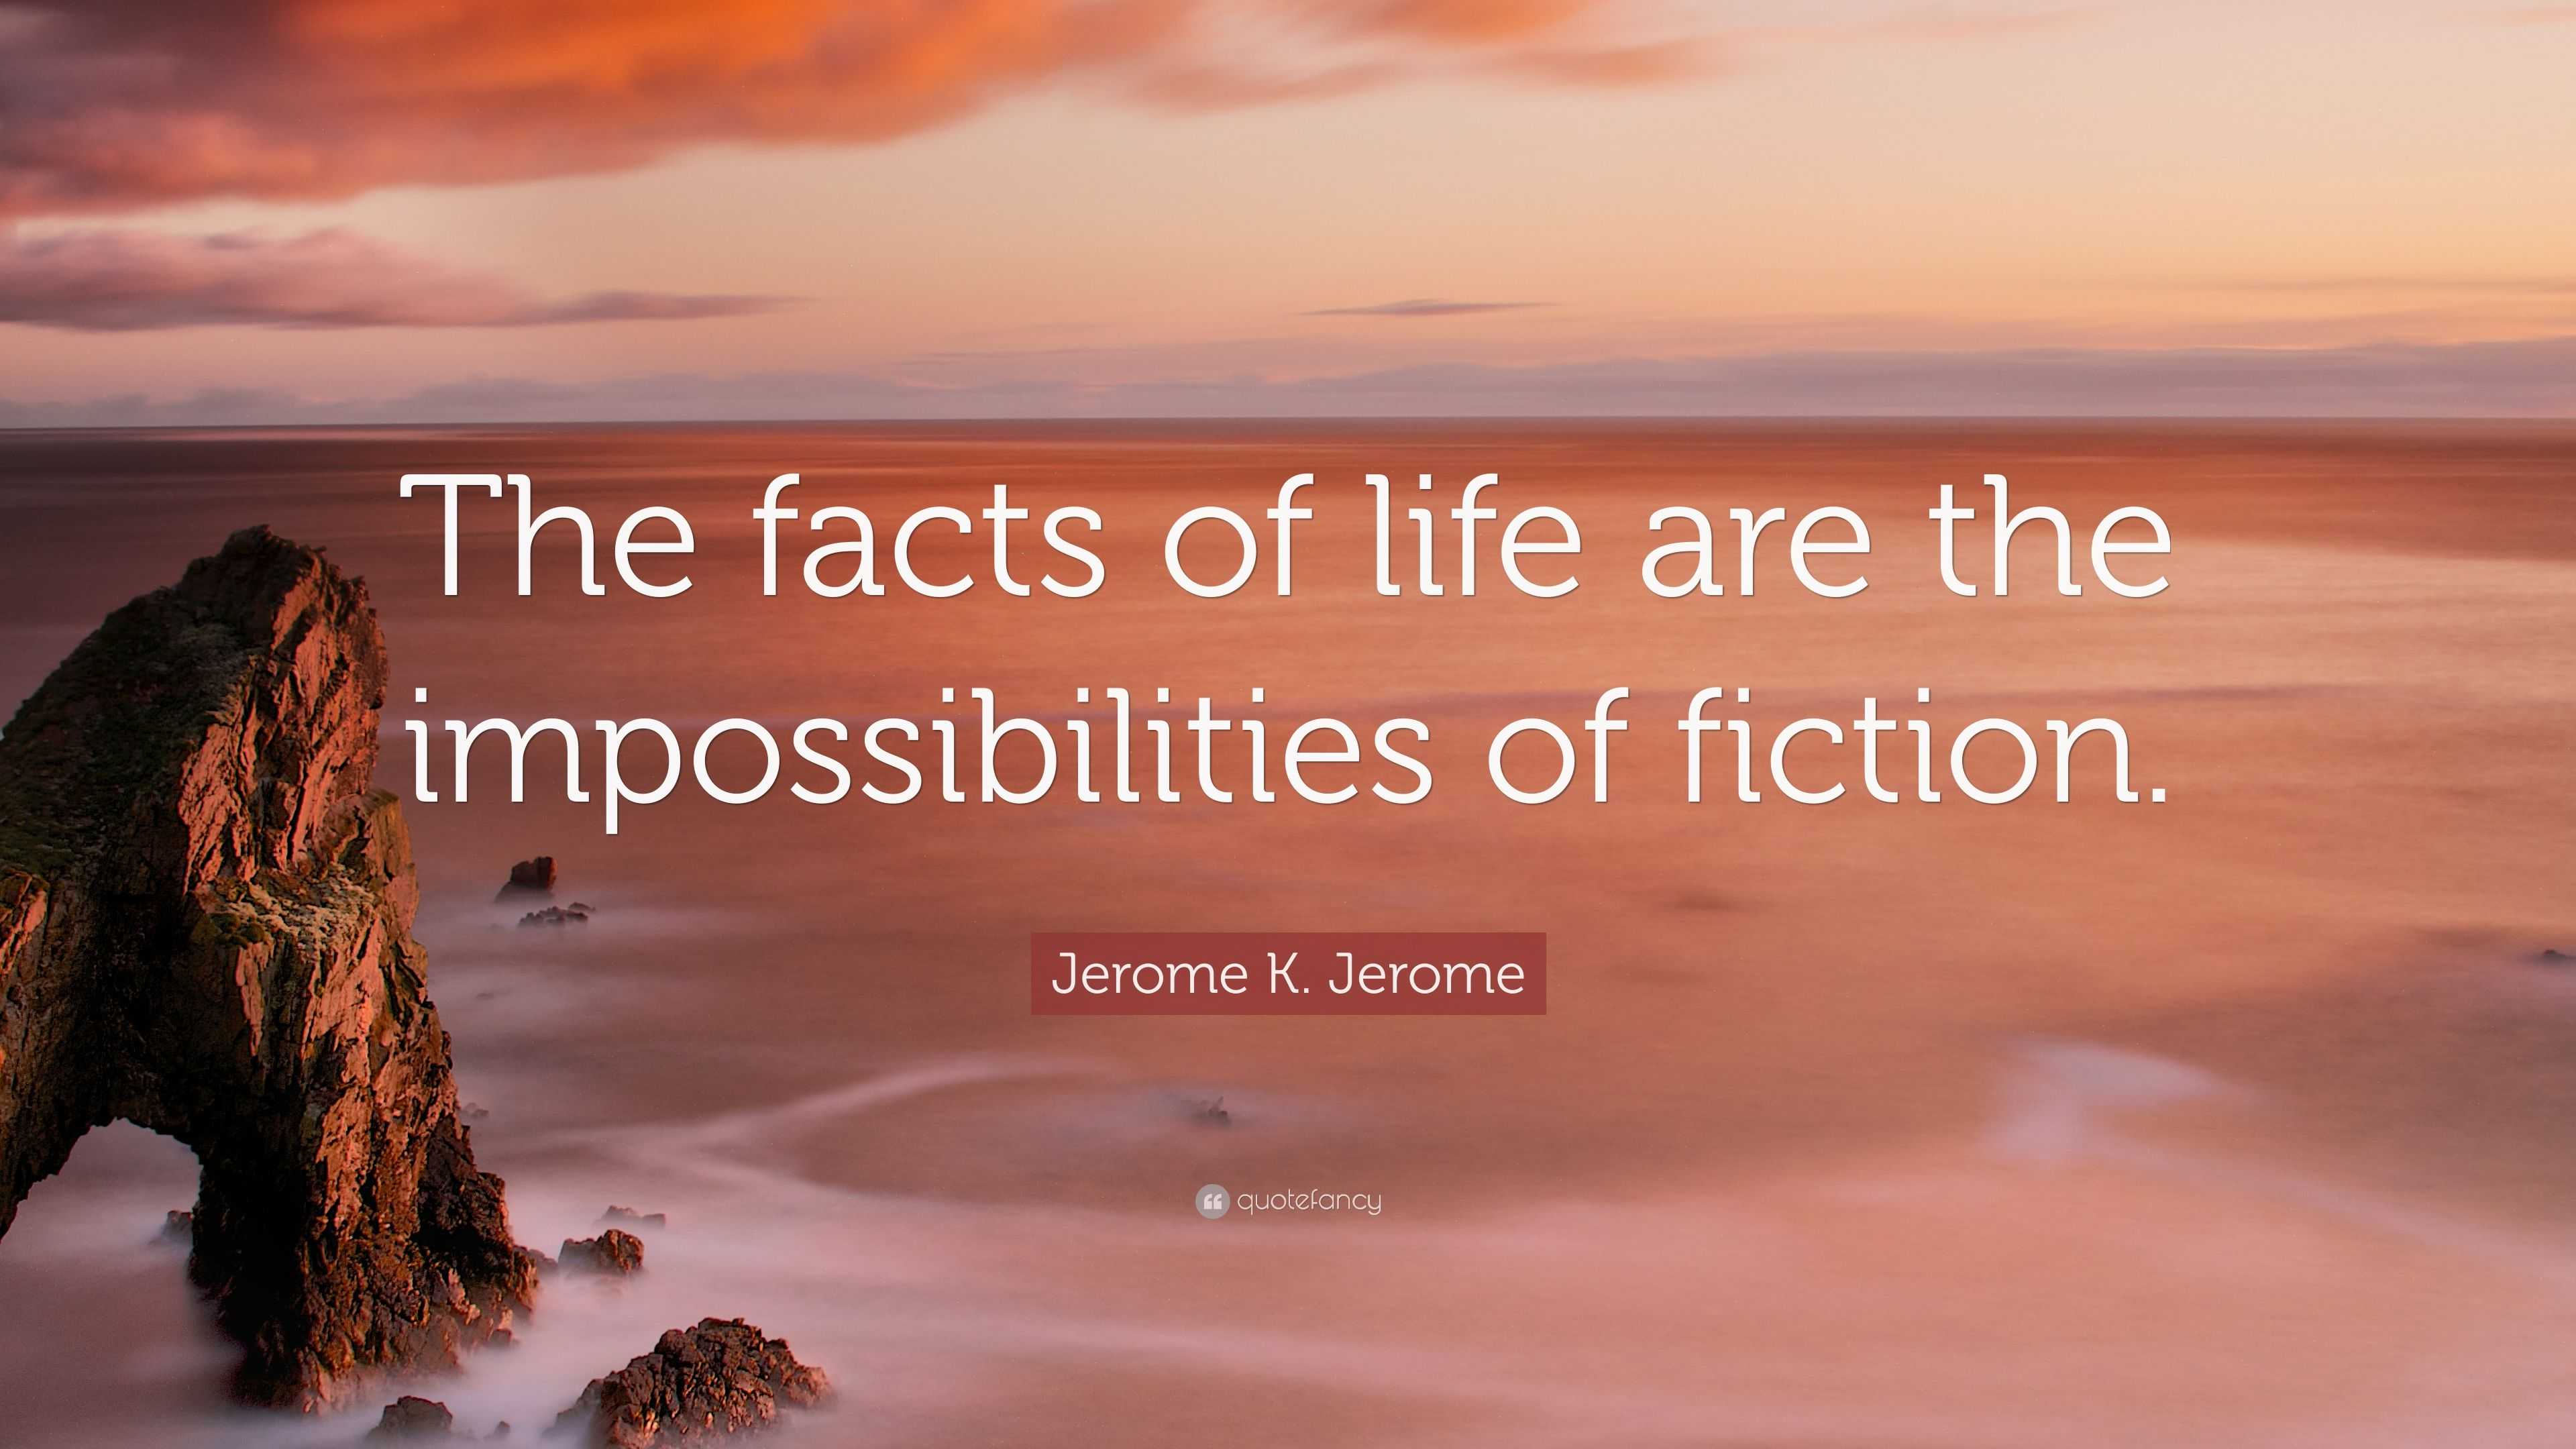 Jerome K. Jerome Quote: “The facts of life are the impossibilities of